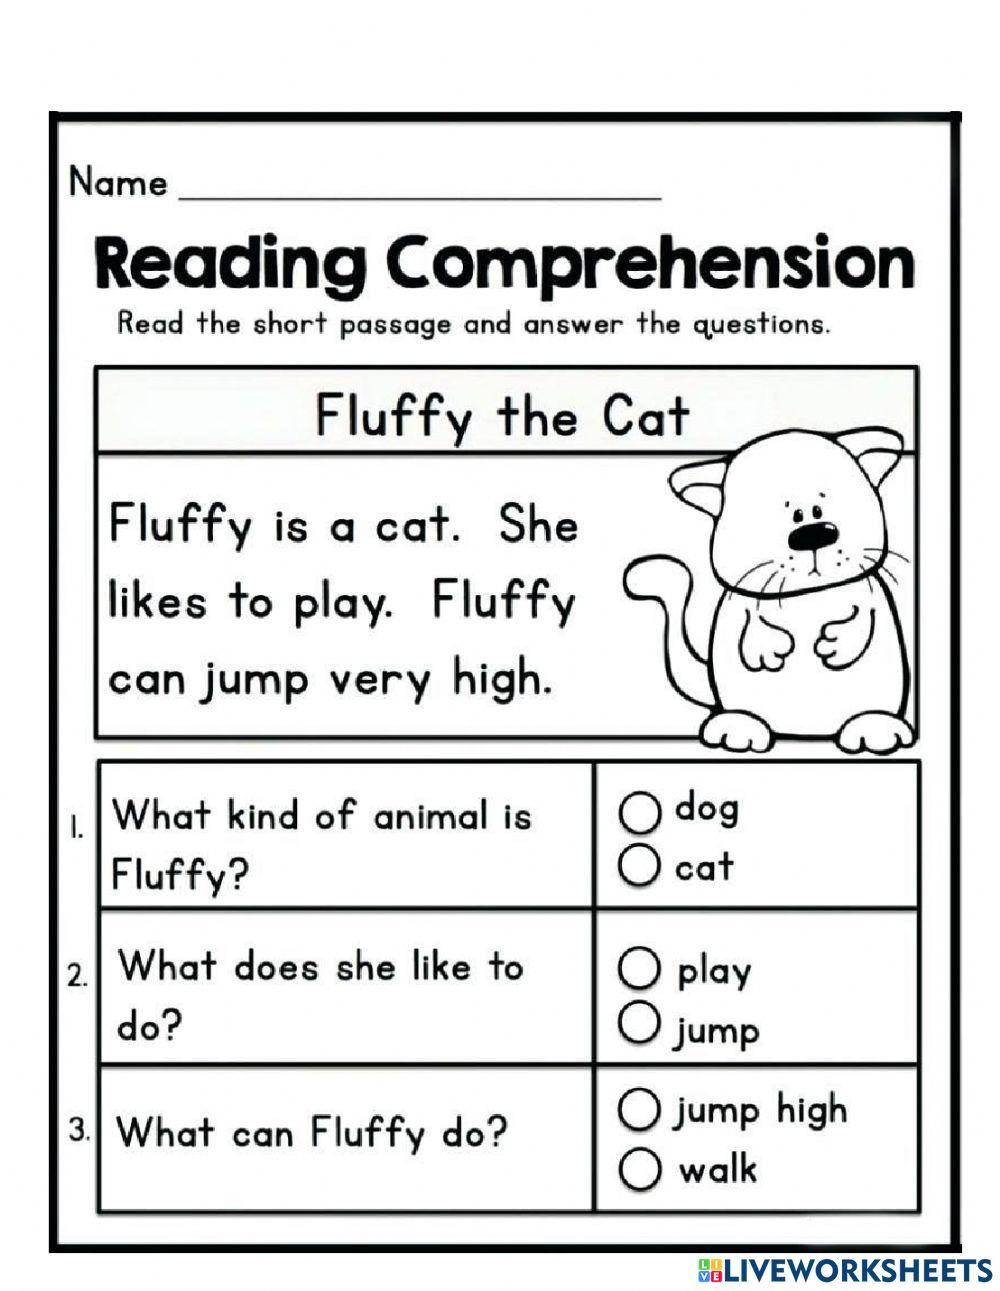 Fluffy the Cat Reading Comprehension